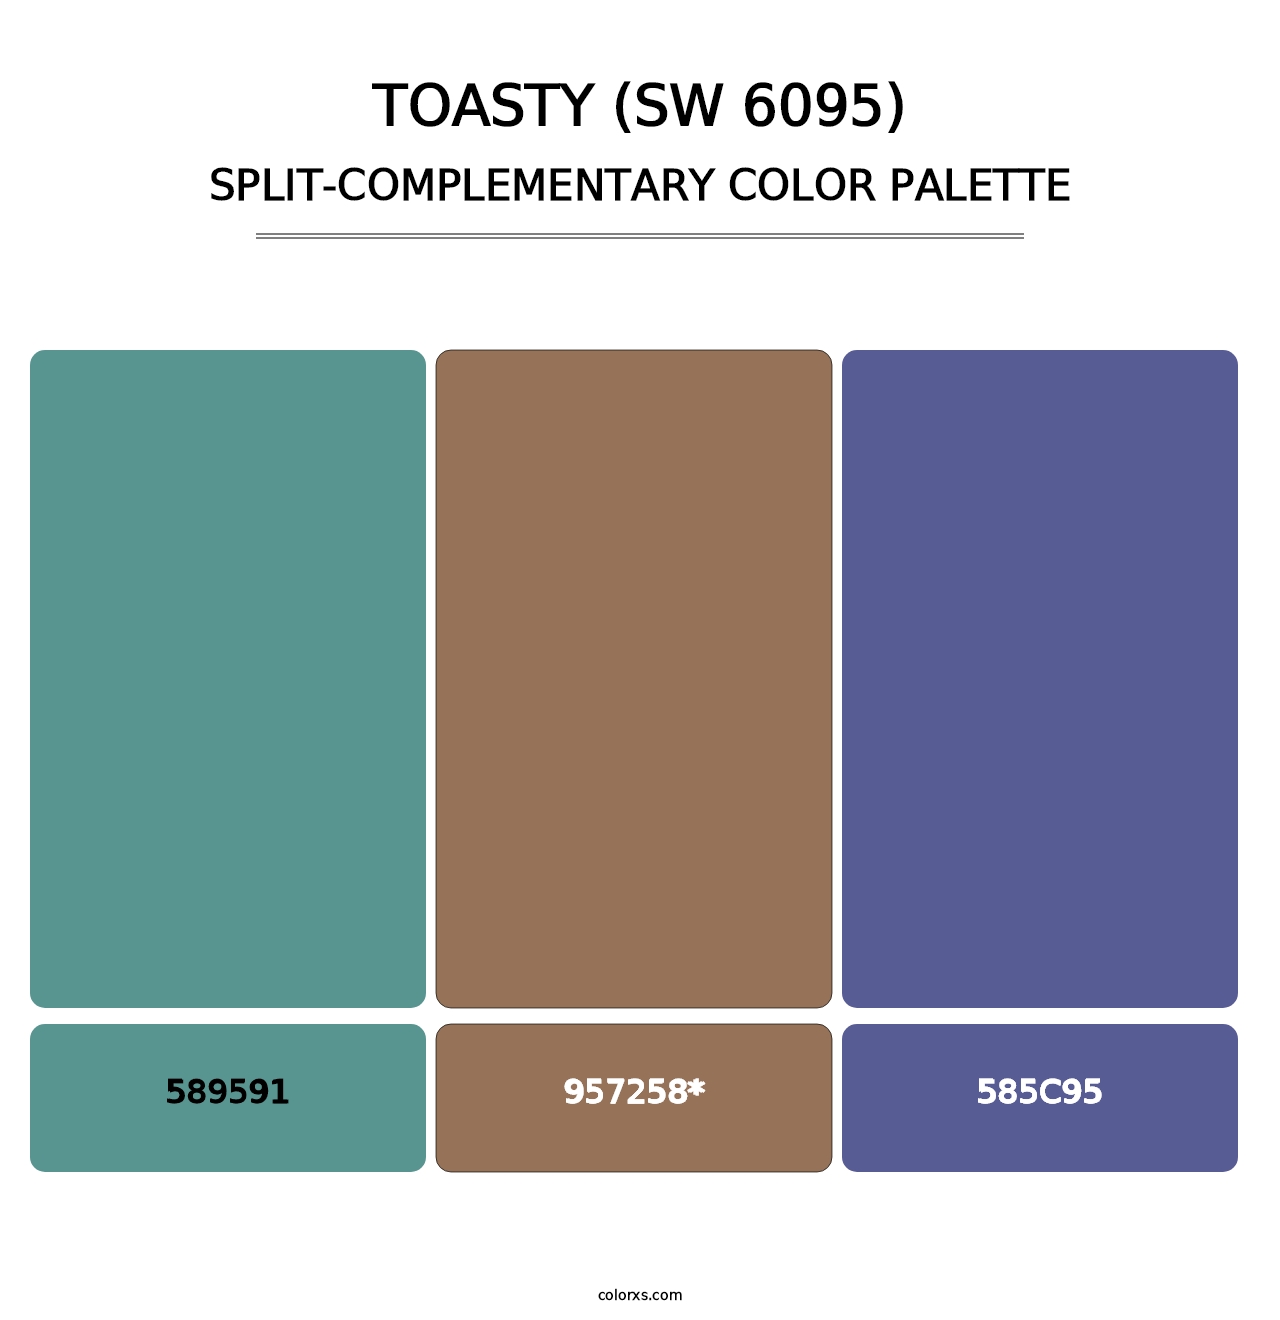 Toasty (SW 6095) - Split-Complementary Color Palette